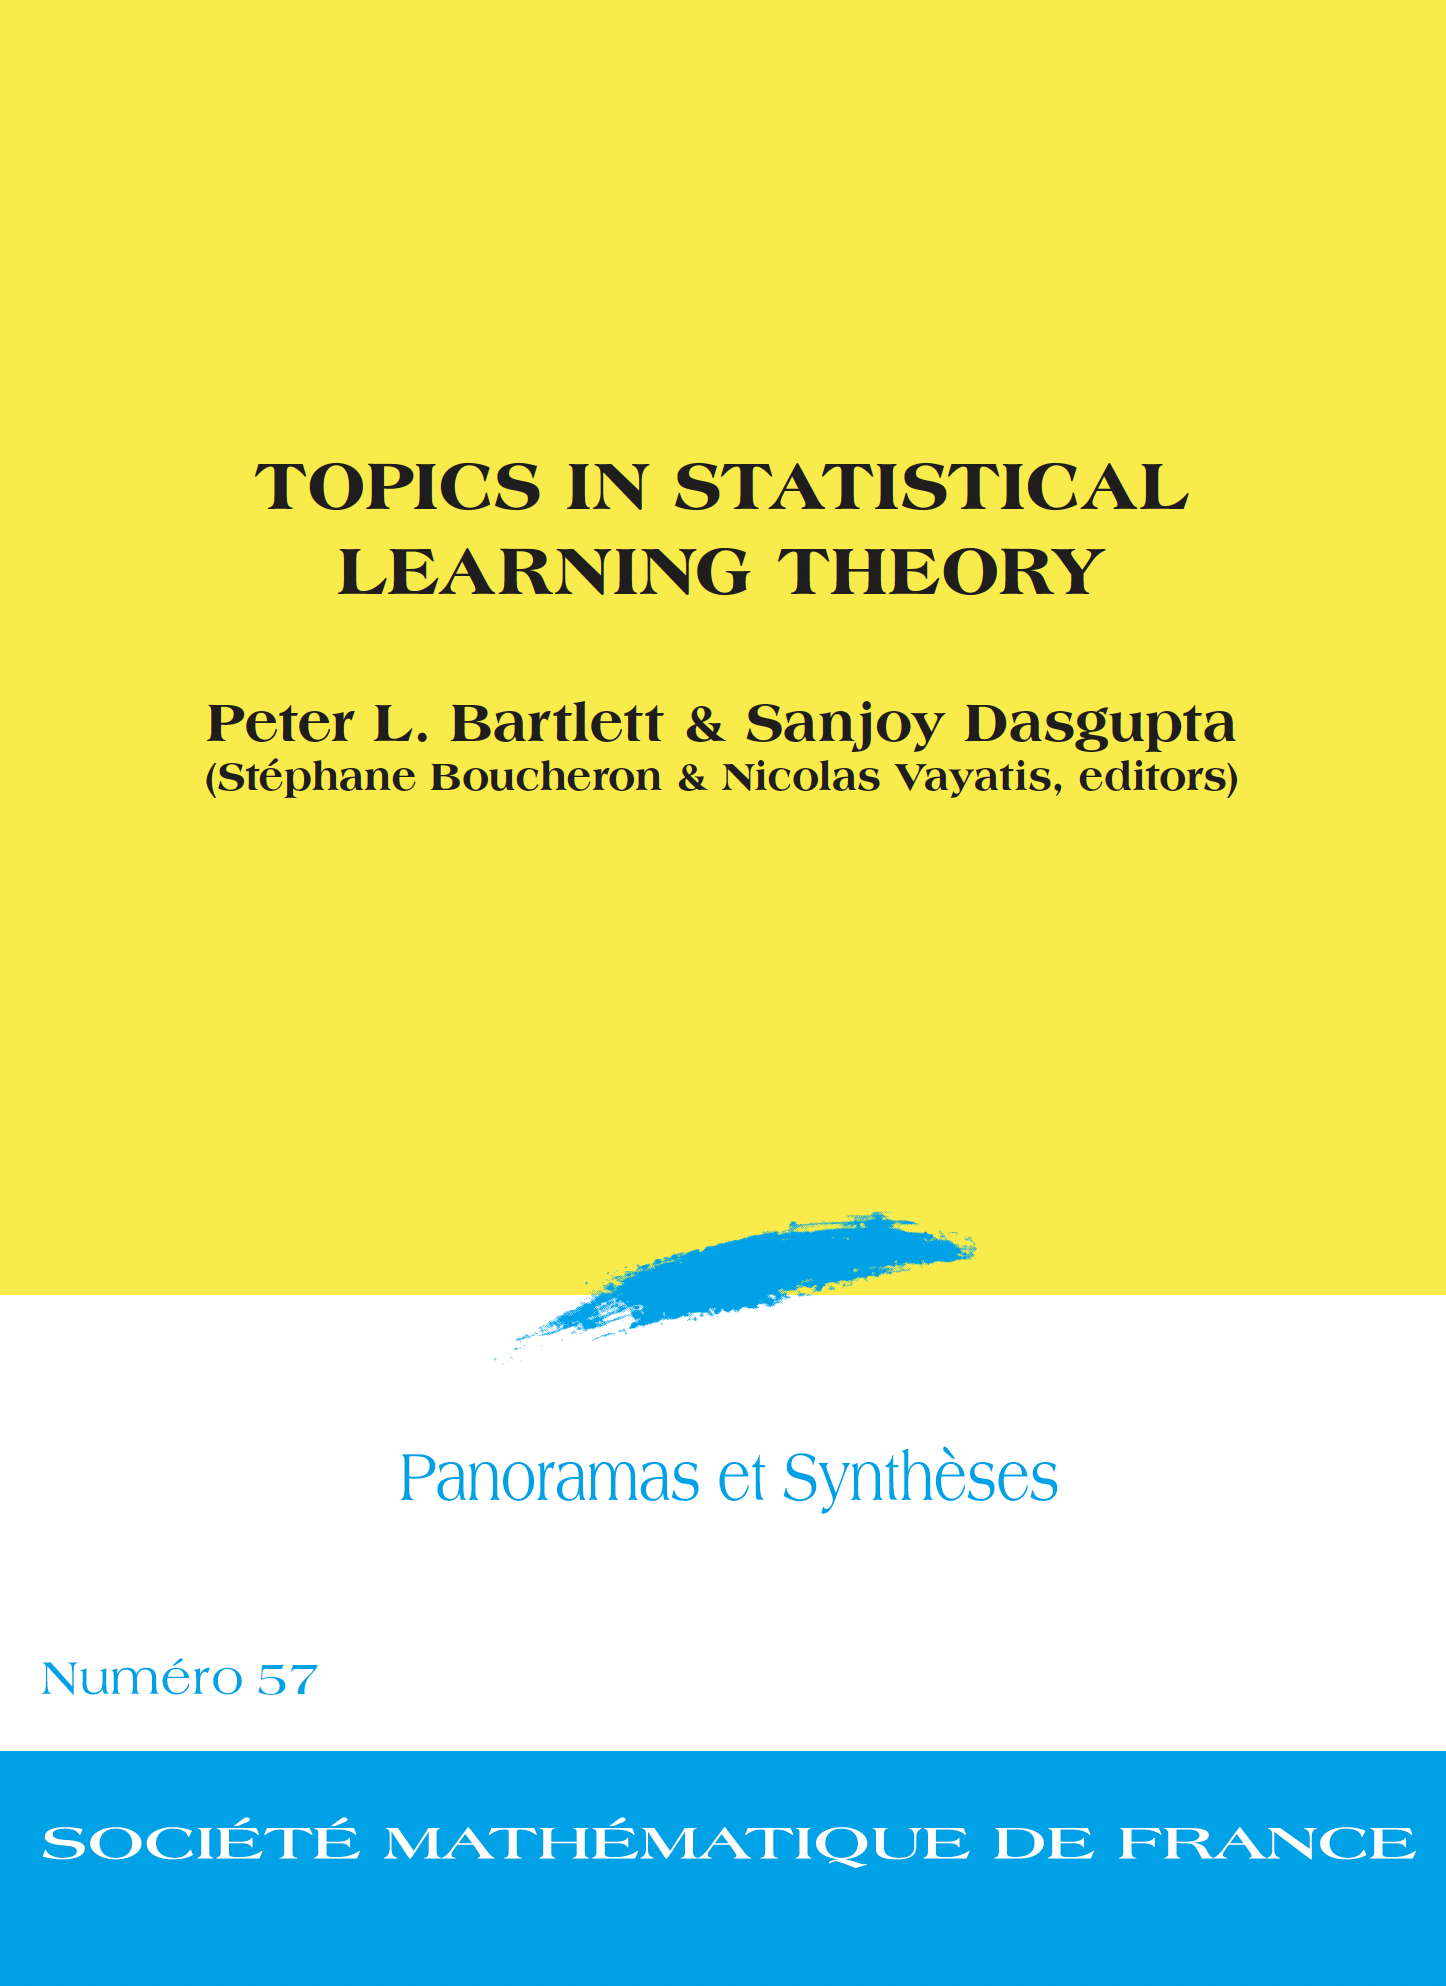 Topics in statistical learning theory